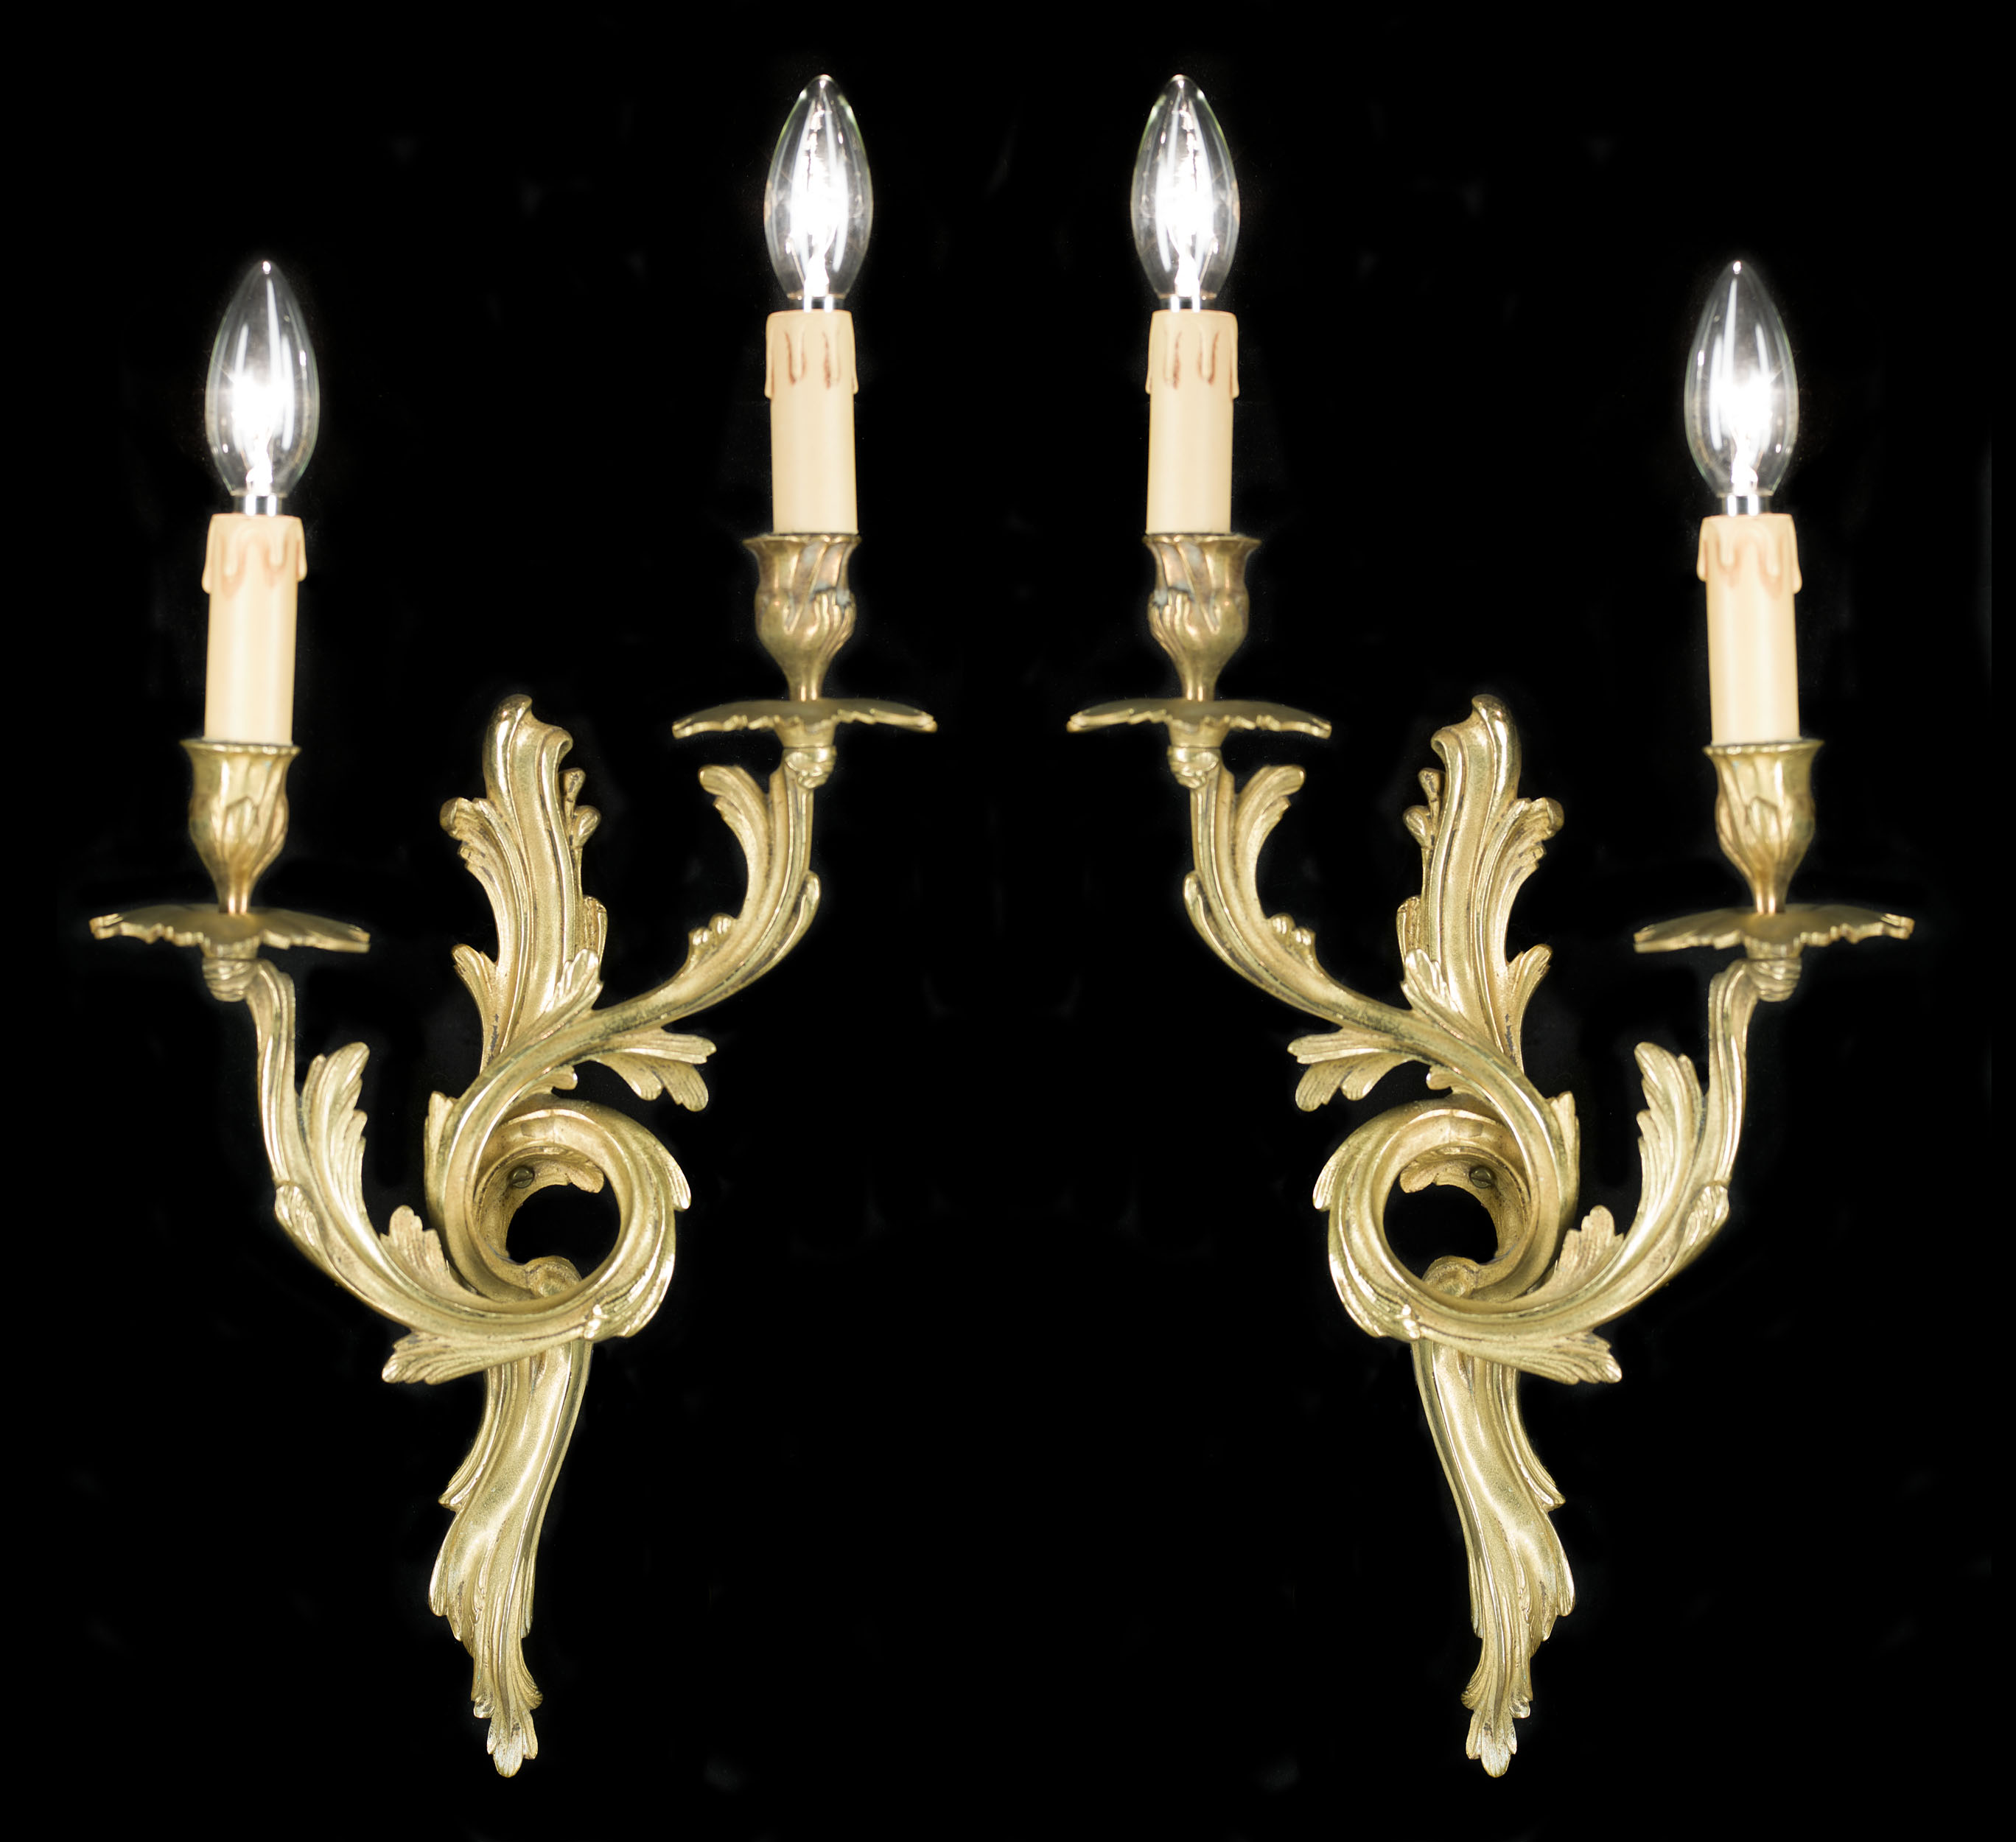  A 20th century pair of Rococo style wall lights   